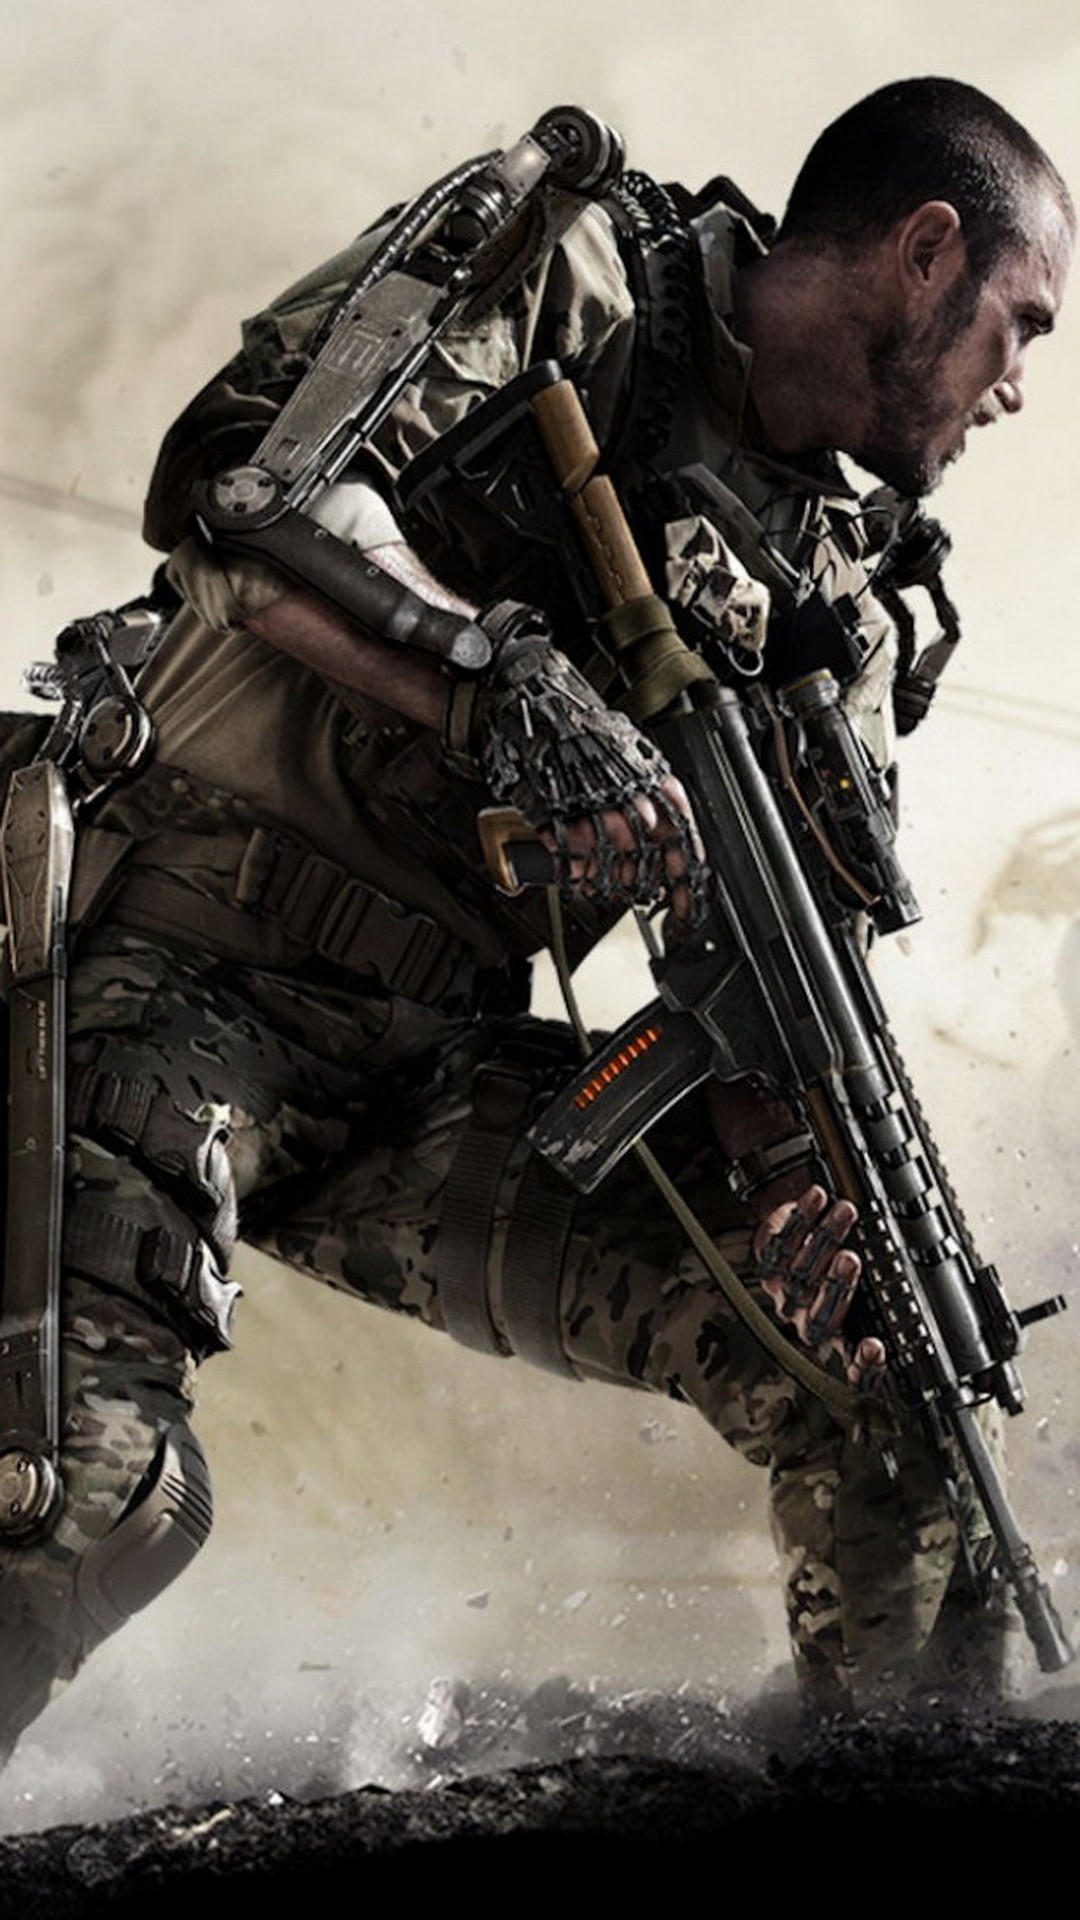 call of duty iphone wallpaper,action adventure game,shooter game,soldier,movie,army